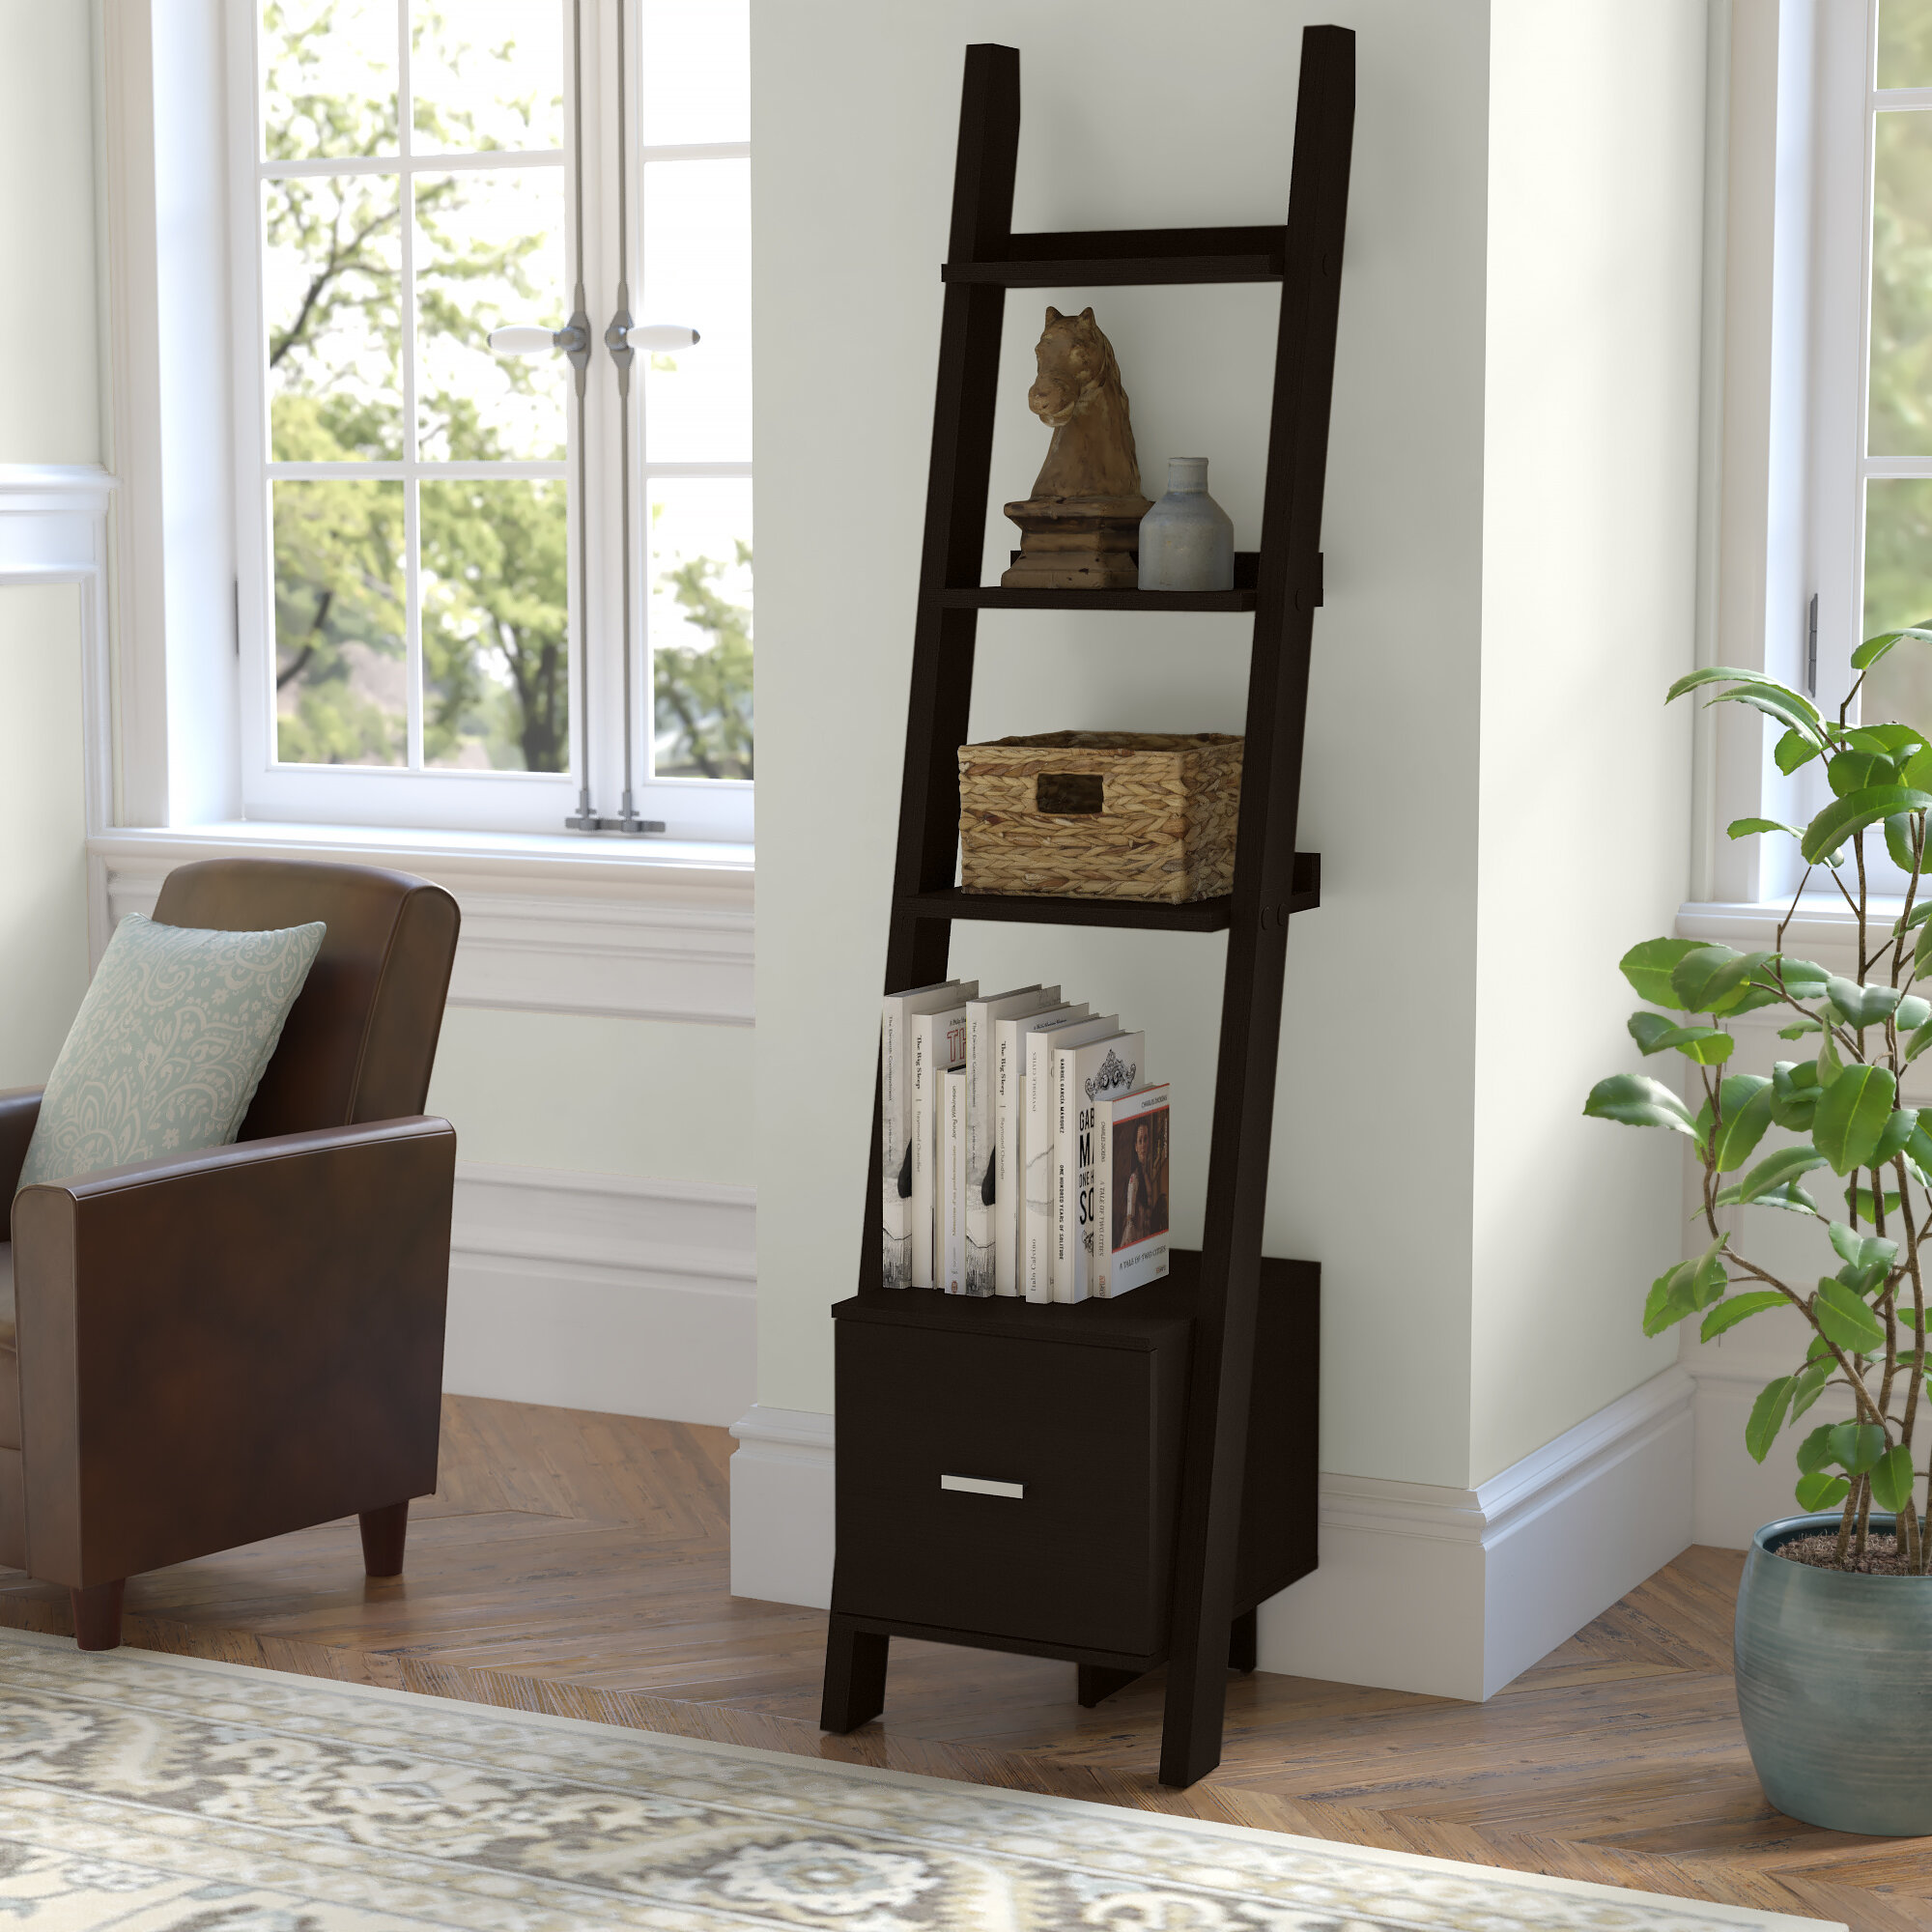 Monarch Specialties Cappuccino 69h Ladder Bookcase With 2 Storage Drawers for sale online 